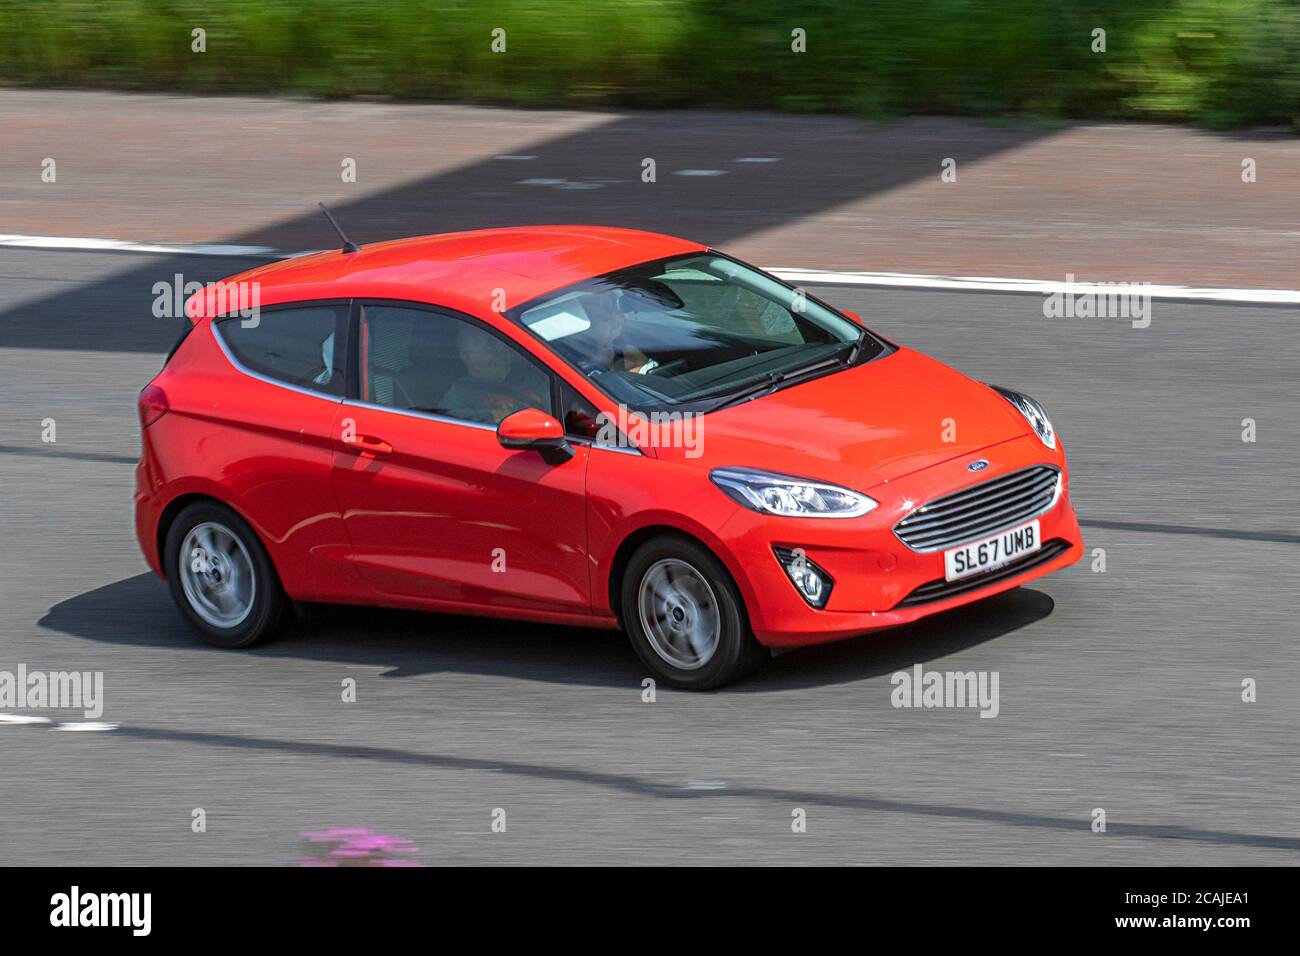 2017 (67)) red Ford Fiesta Zetec; Vehicular traffic moving vehicles, cars driving vehicle on UK roads, motors, motoring on the M6 motorway highway network. Stock Photo